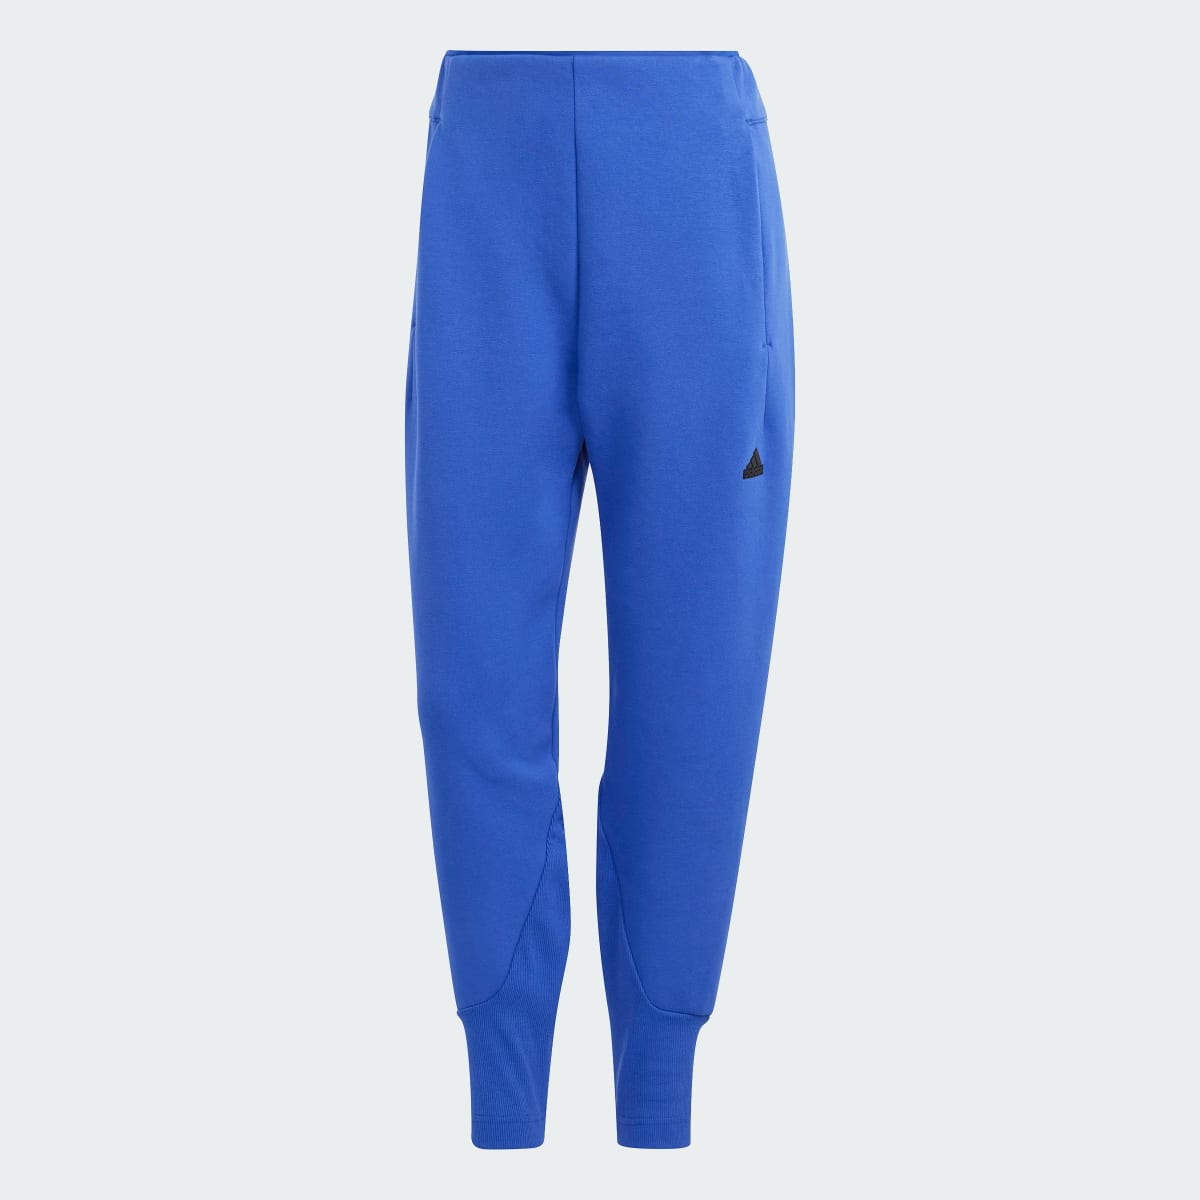 Adidas Z.N.E. Tracksuit Bottoms. 4